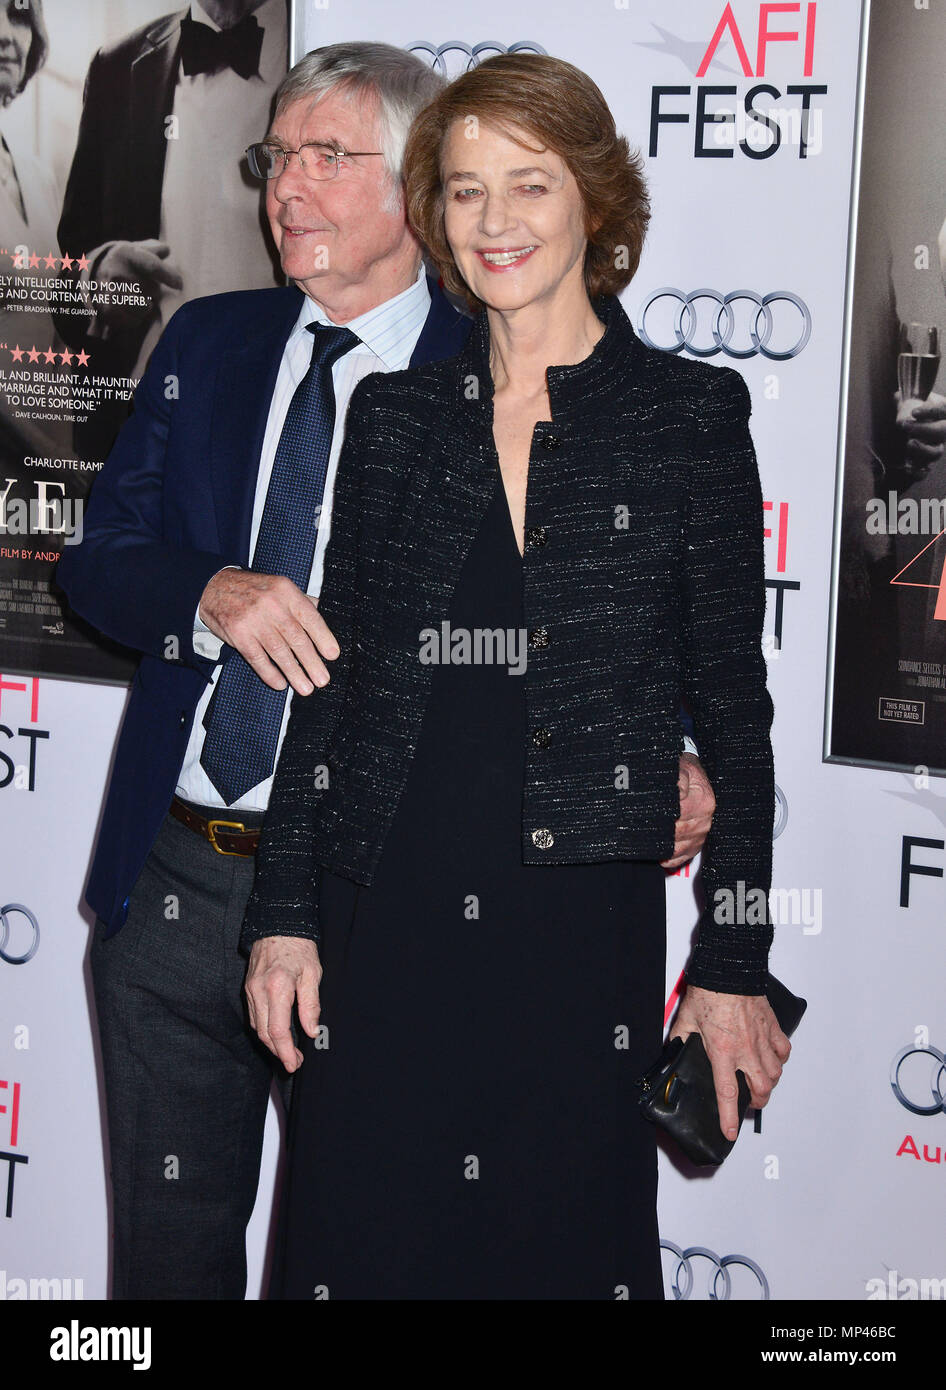 Charlotte Rambling, Tom Courtenay 009 at the Tribute to Charlotte Rampling and Tom Courtenay at the AFI Film Festival, 45 years ,  at the TCL Chinese Theatre in Los Angeles. November 11, 2015.Charlotte Rambling, Tom Courtenay 009 ------------- Red Carpet Event, Vertical, USA, Film Industry, Celebrities,  Photography, Bestof, Arts Culture and Entertainment, Topix Celebrities fashion /  Vertical, Best of, Event in Hollywood Life - California,  Red Carpet and backstage, USA, Film Industry, Celebrities,  movie celebrities, TV celebrities, Music celebrities, Photography, Bestof, Arts Culture and En Stock Photo